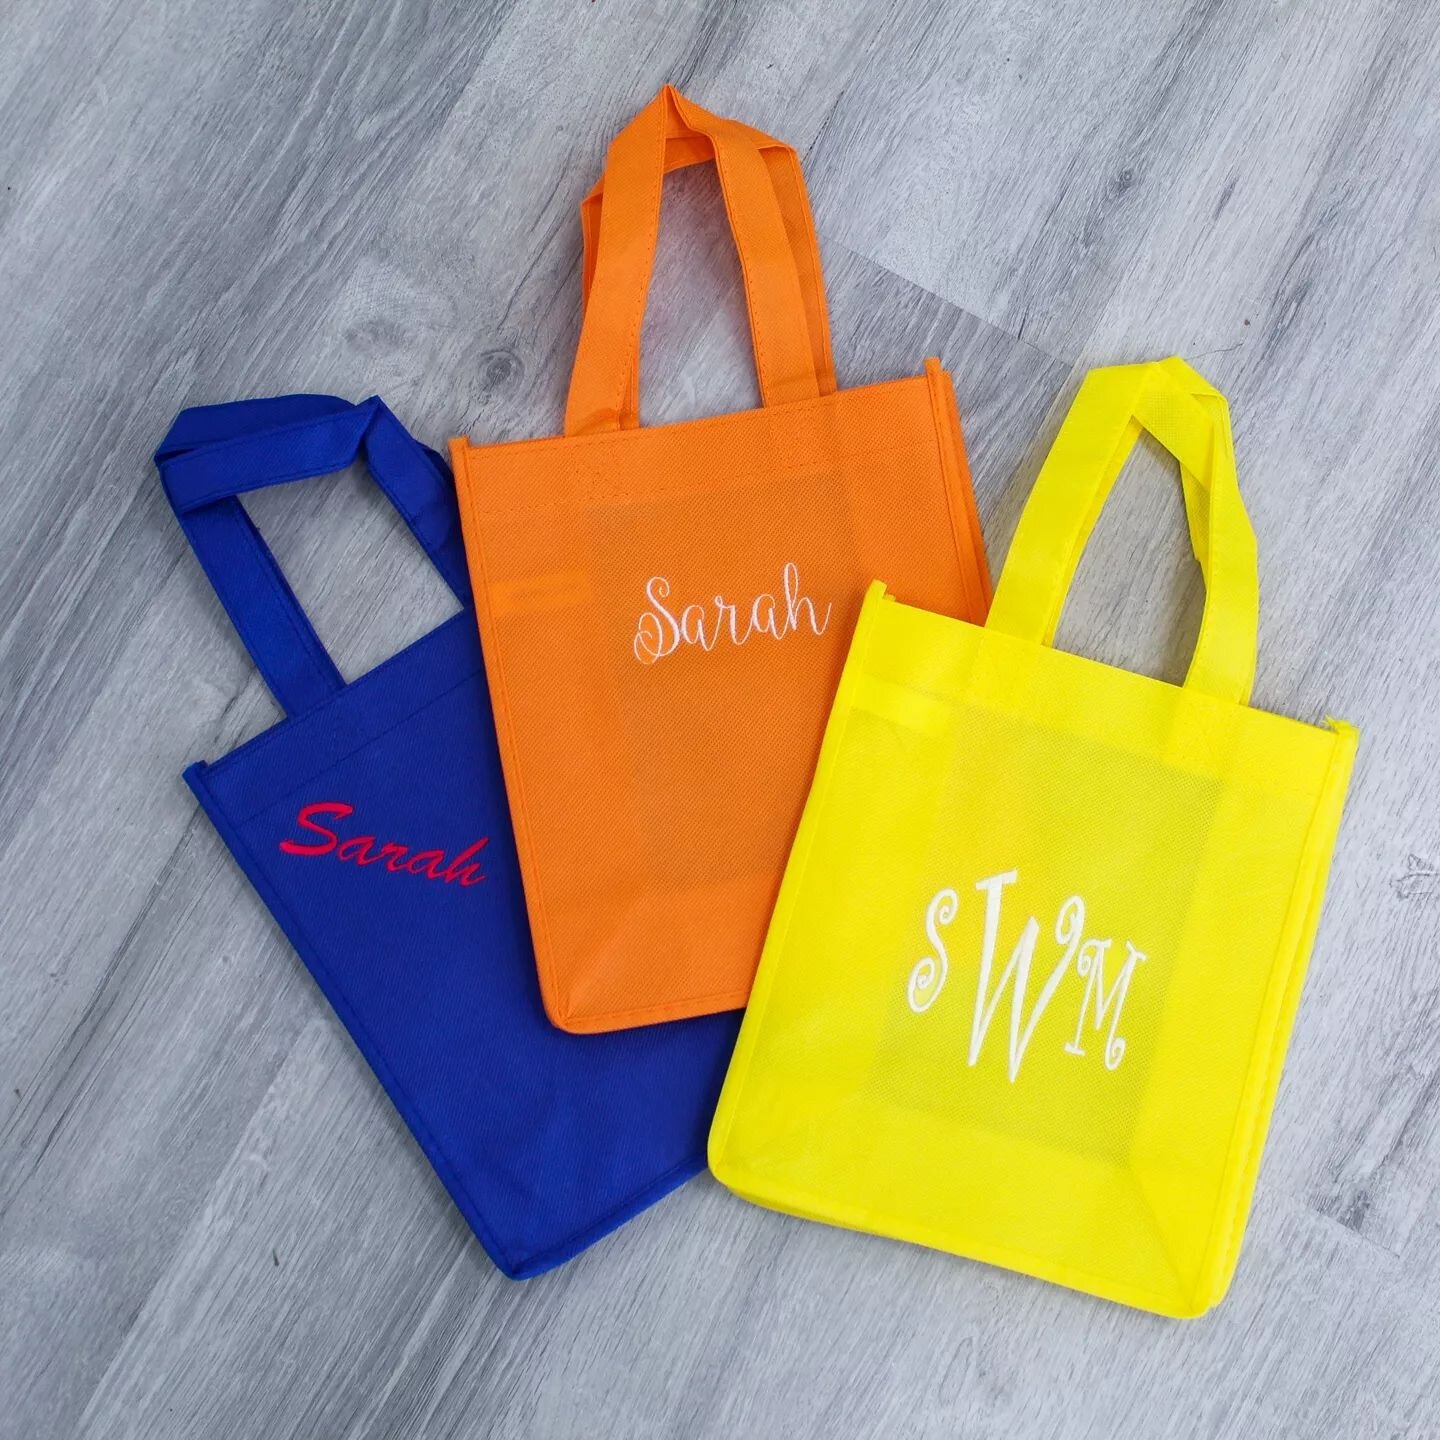 These bags are looking great! Keep bringing us your favorite things, and we'll help personalize them with a monogram or name! We have tons of fonts and colors to choose from, and our experienced staff are ready to help you design exactly what you nee